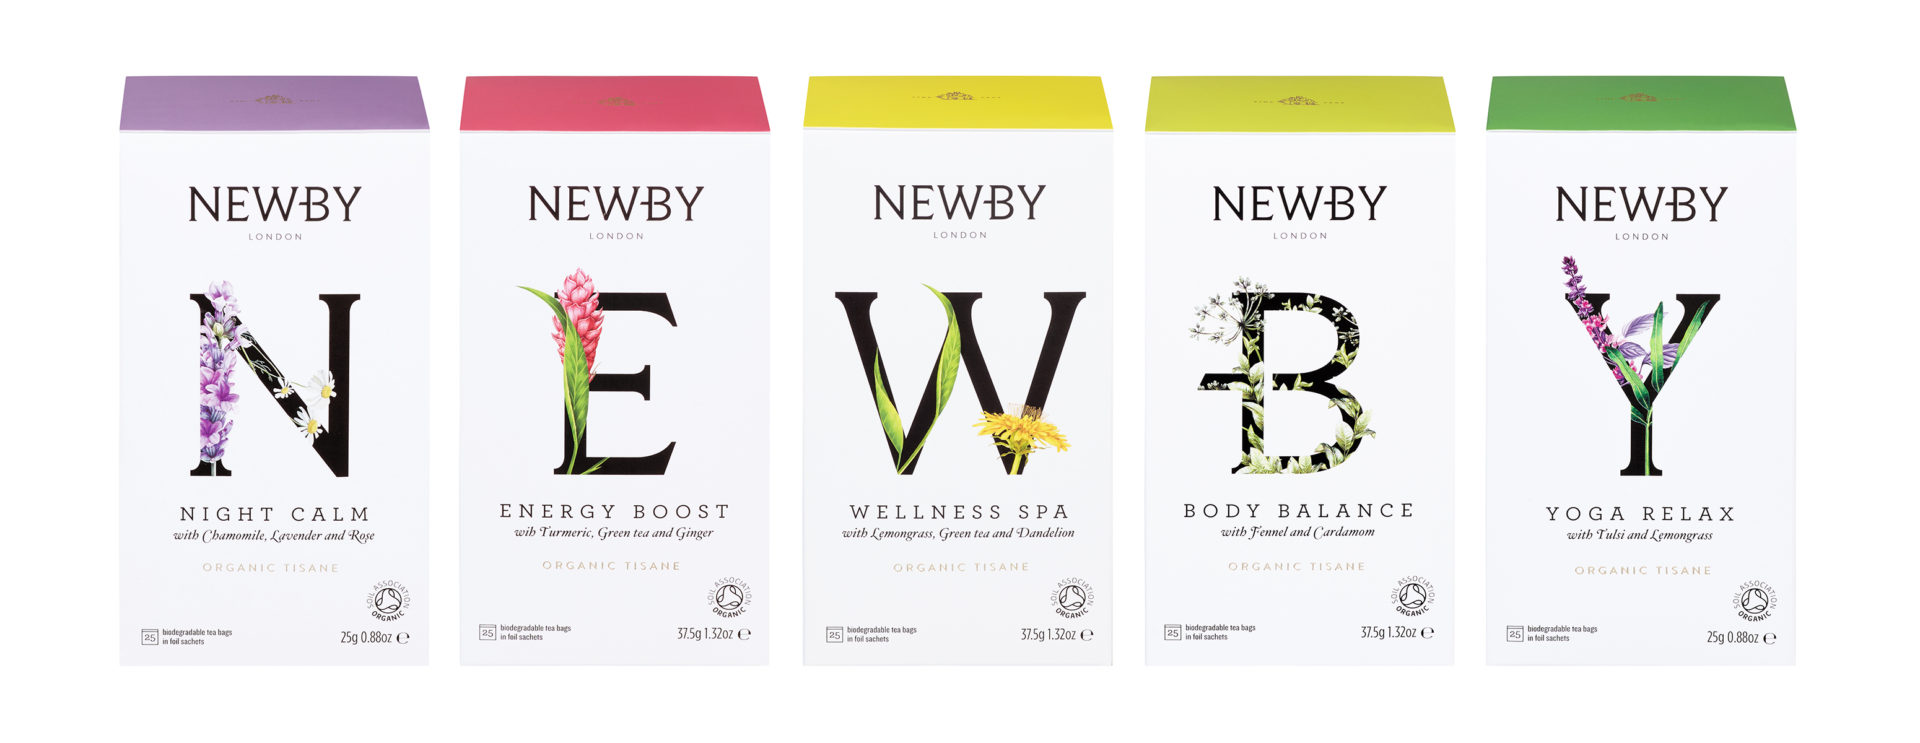 Newby Teas Wellness Collection Front